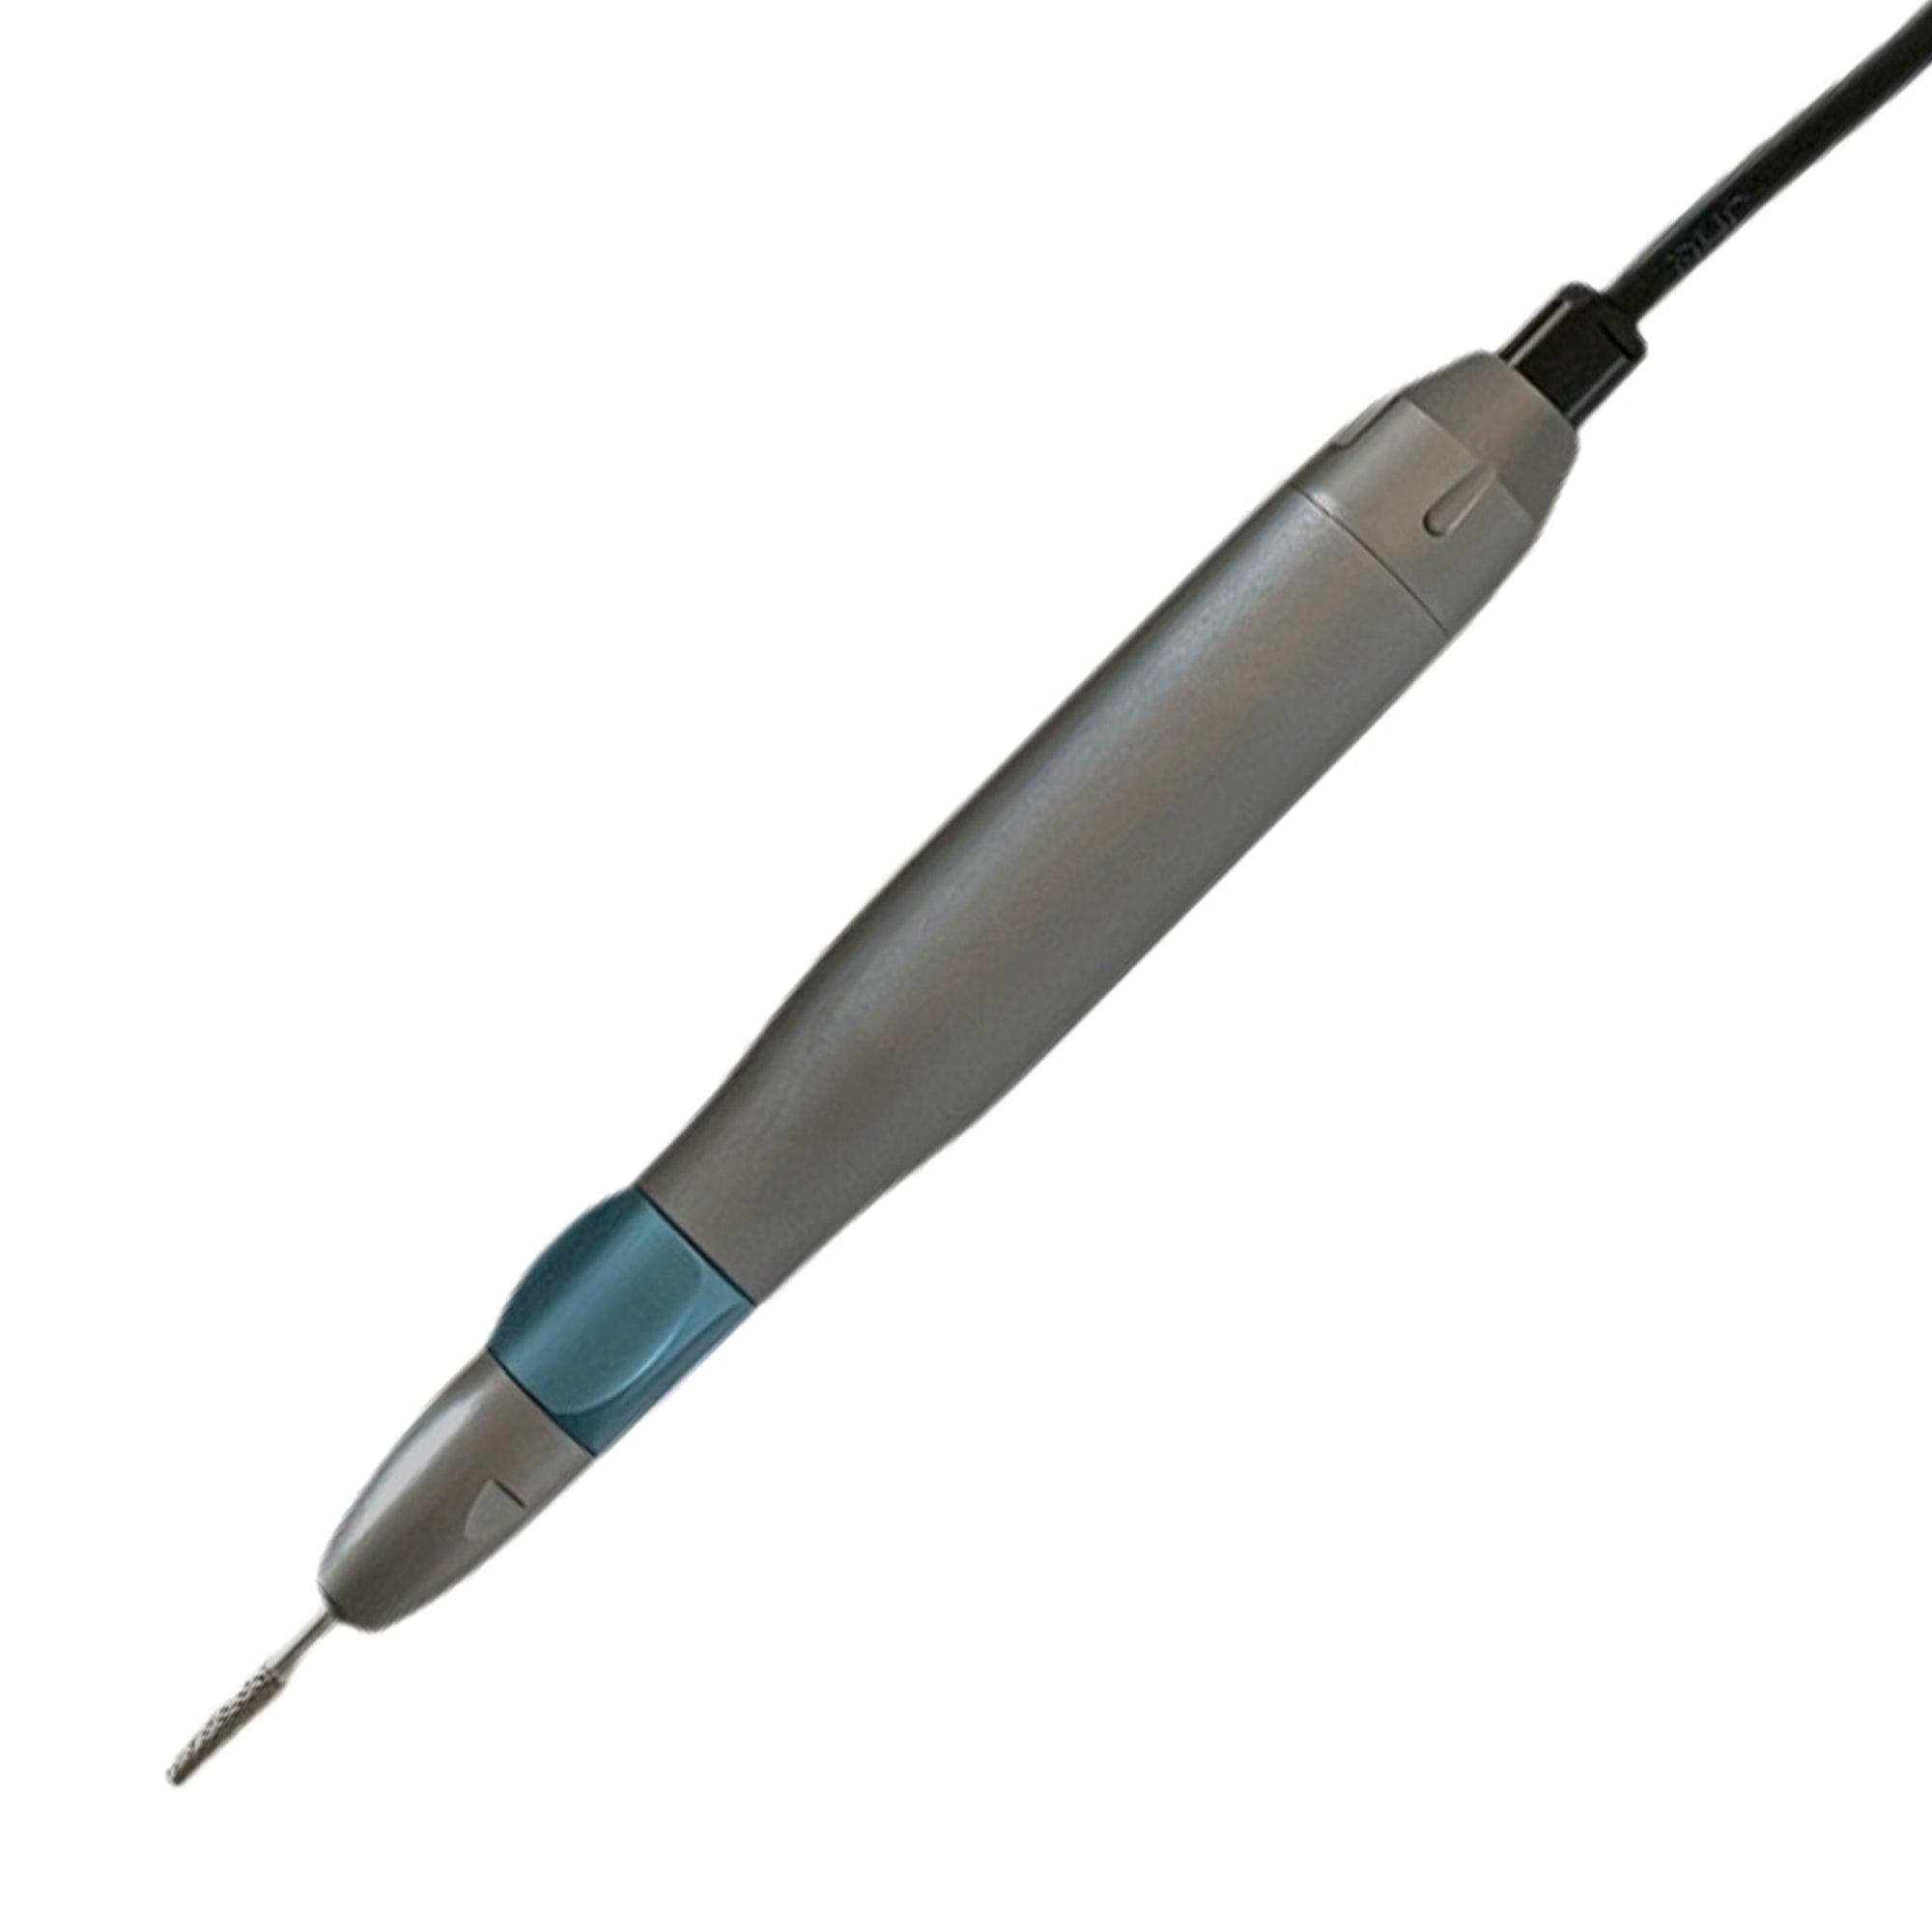 Mariotti FLY Brushless Micromotor For Dental And Podiatry Uses